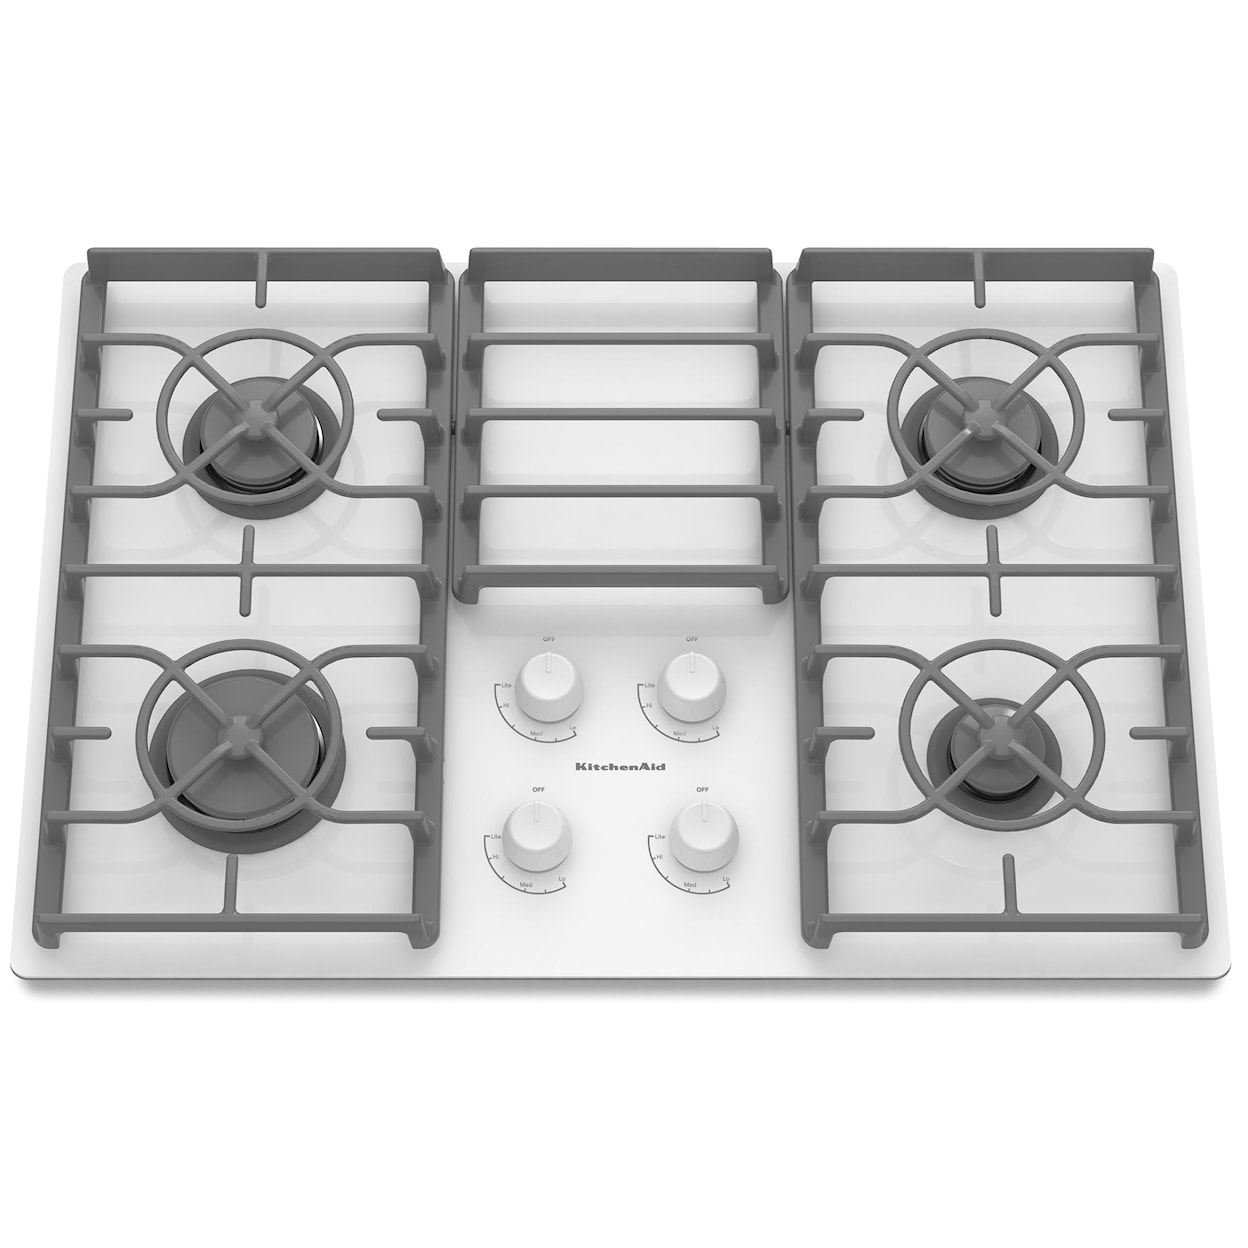 KitchenAid Gas Cooktops 30" Built-In Gas Cooktop